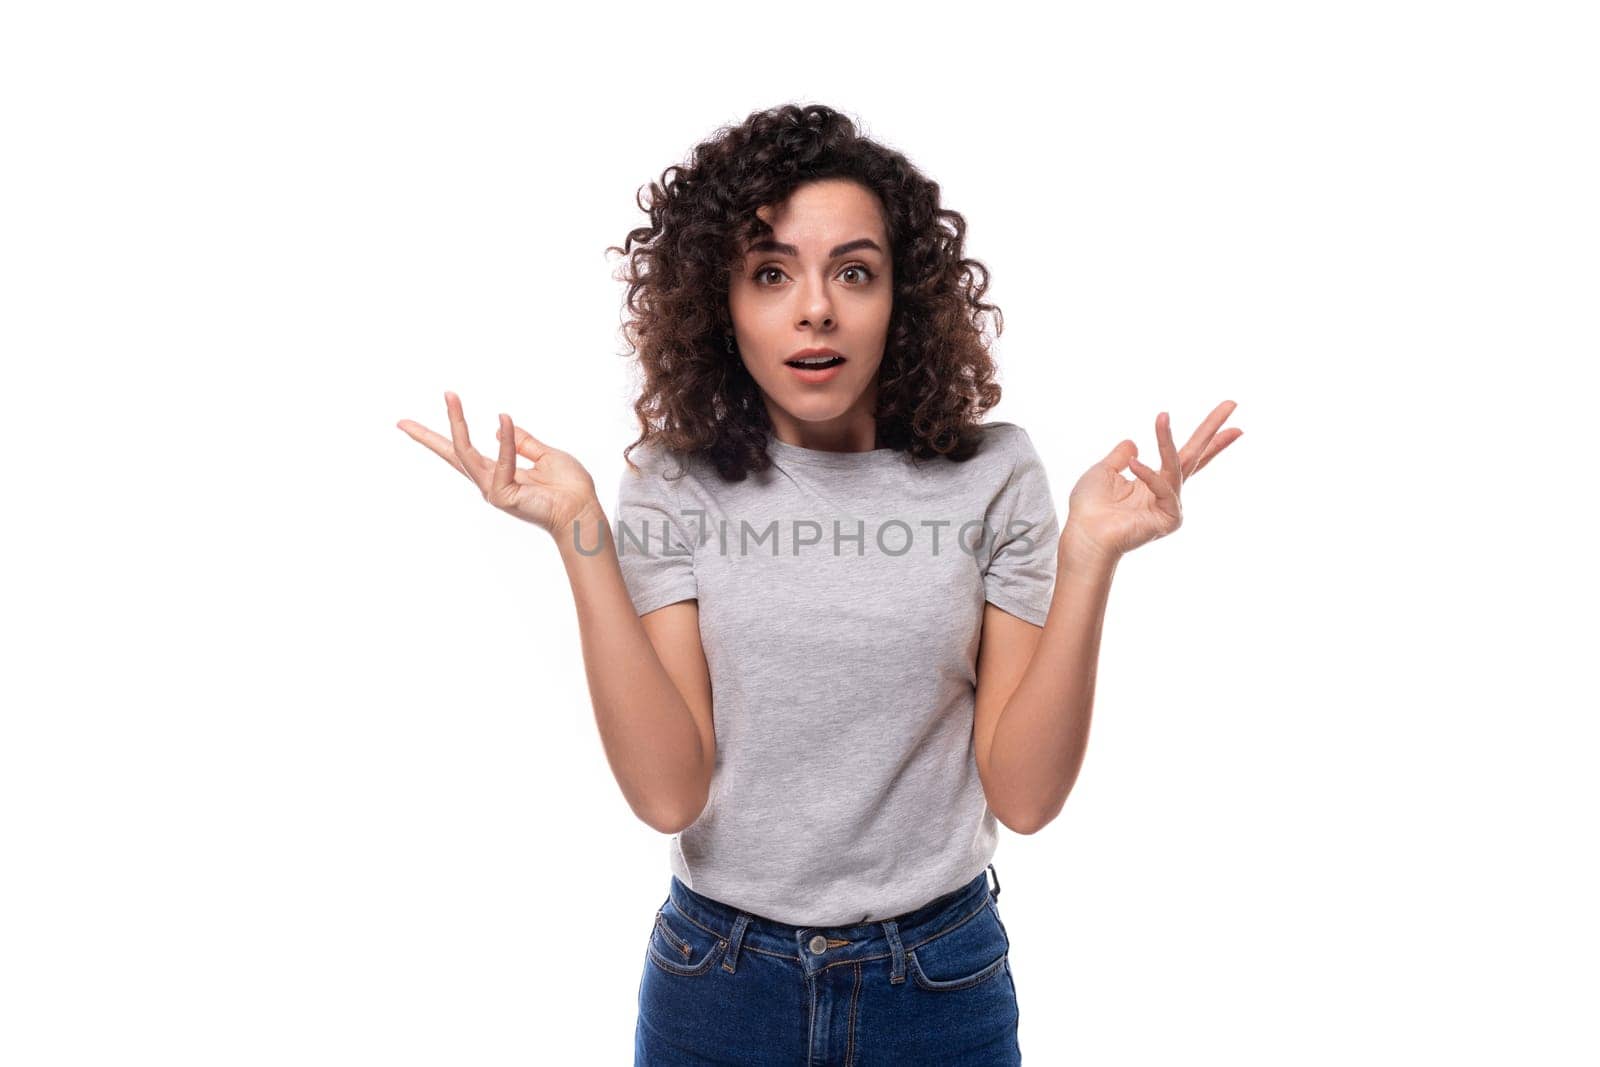 portrait of a cute slim young caucasian woman with careless black curly hair dressed in a gray t-shirt.